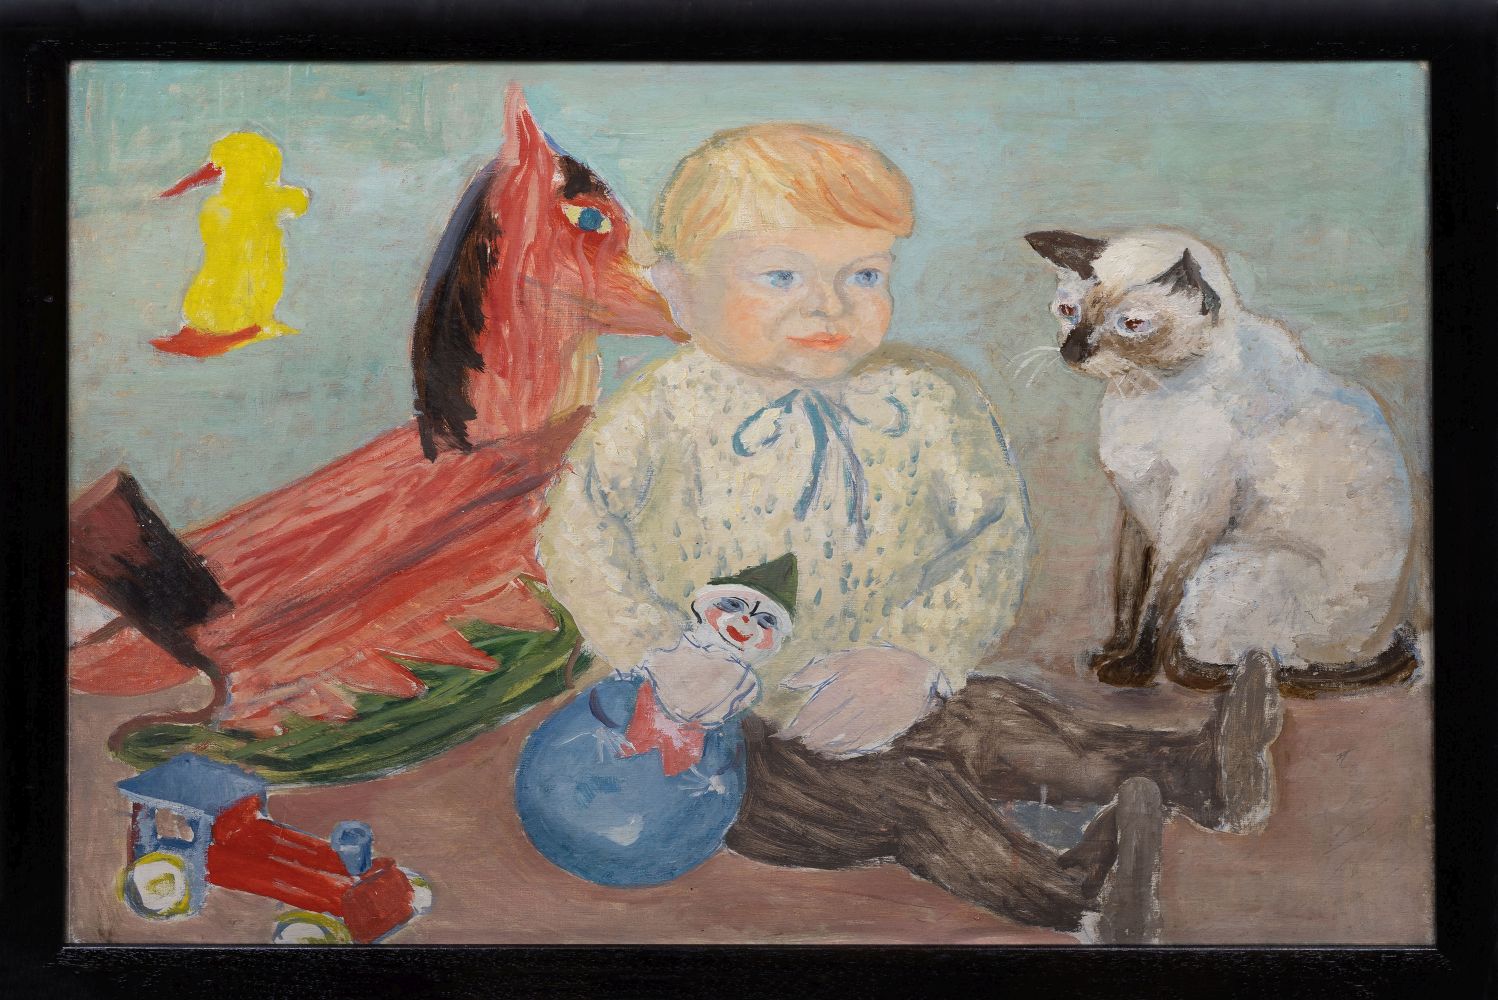 Child with Cat and Toys - image 2